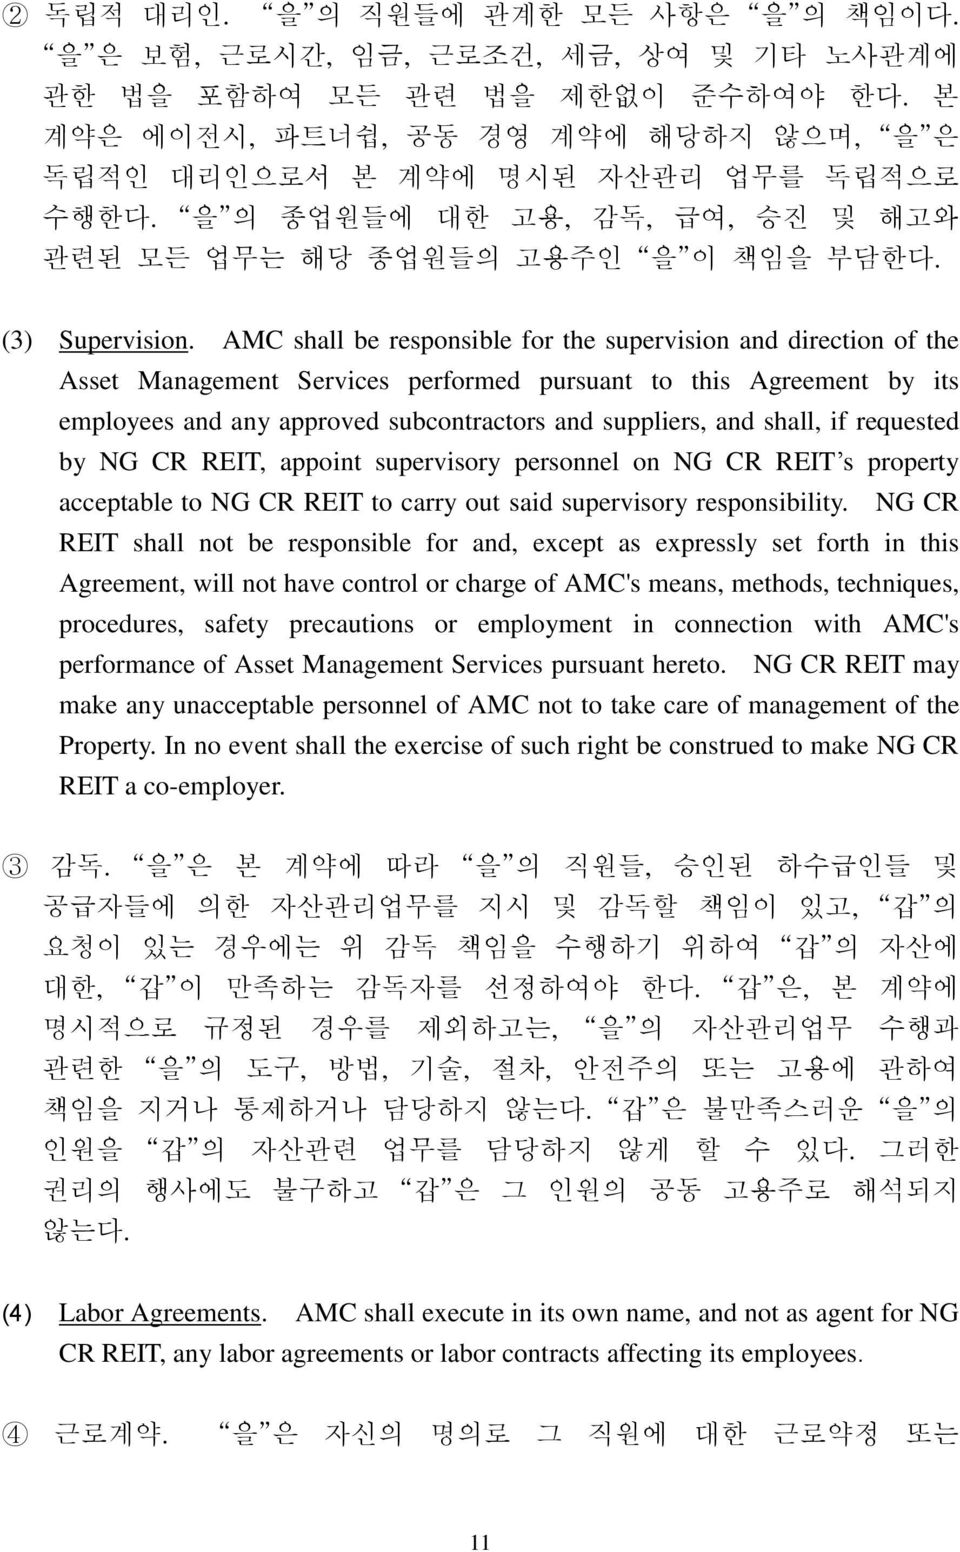 AMC shall be responsible for the supervision and direction of the Asset Management Services performed pursuant to this Agreement by its employees and any approved subcontractors and suppliers, and